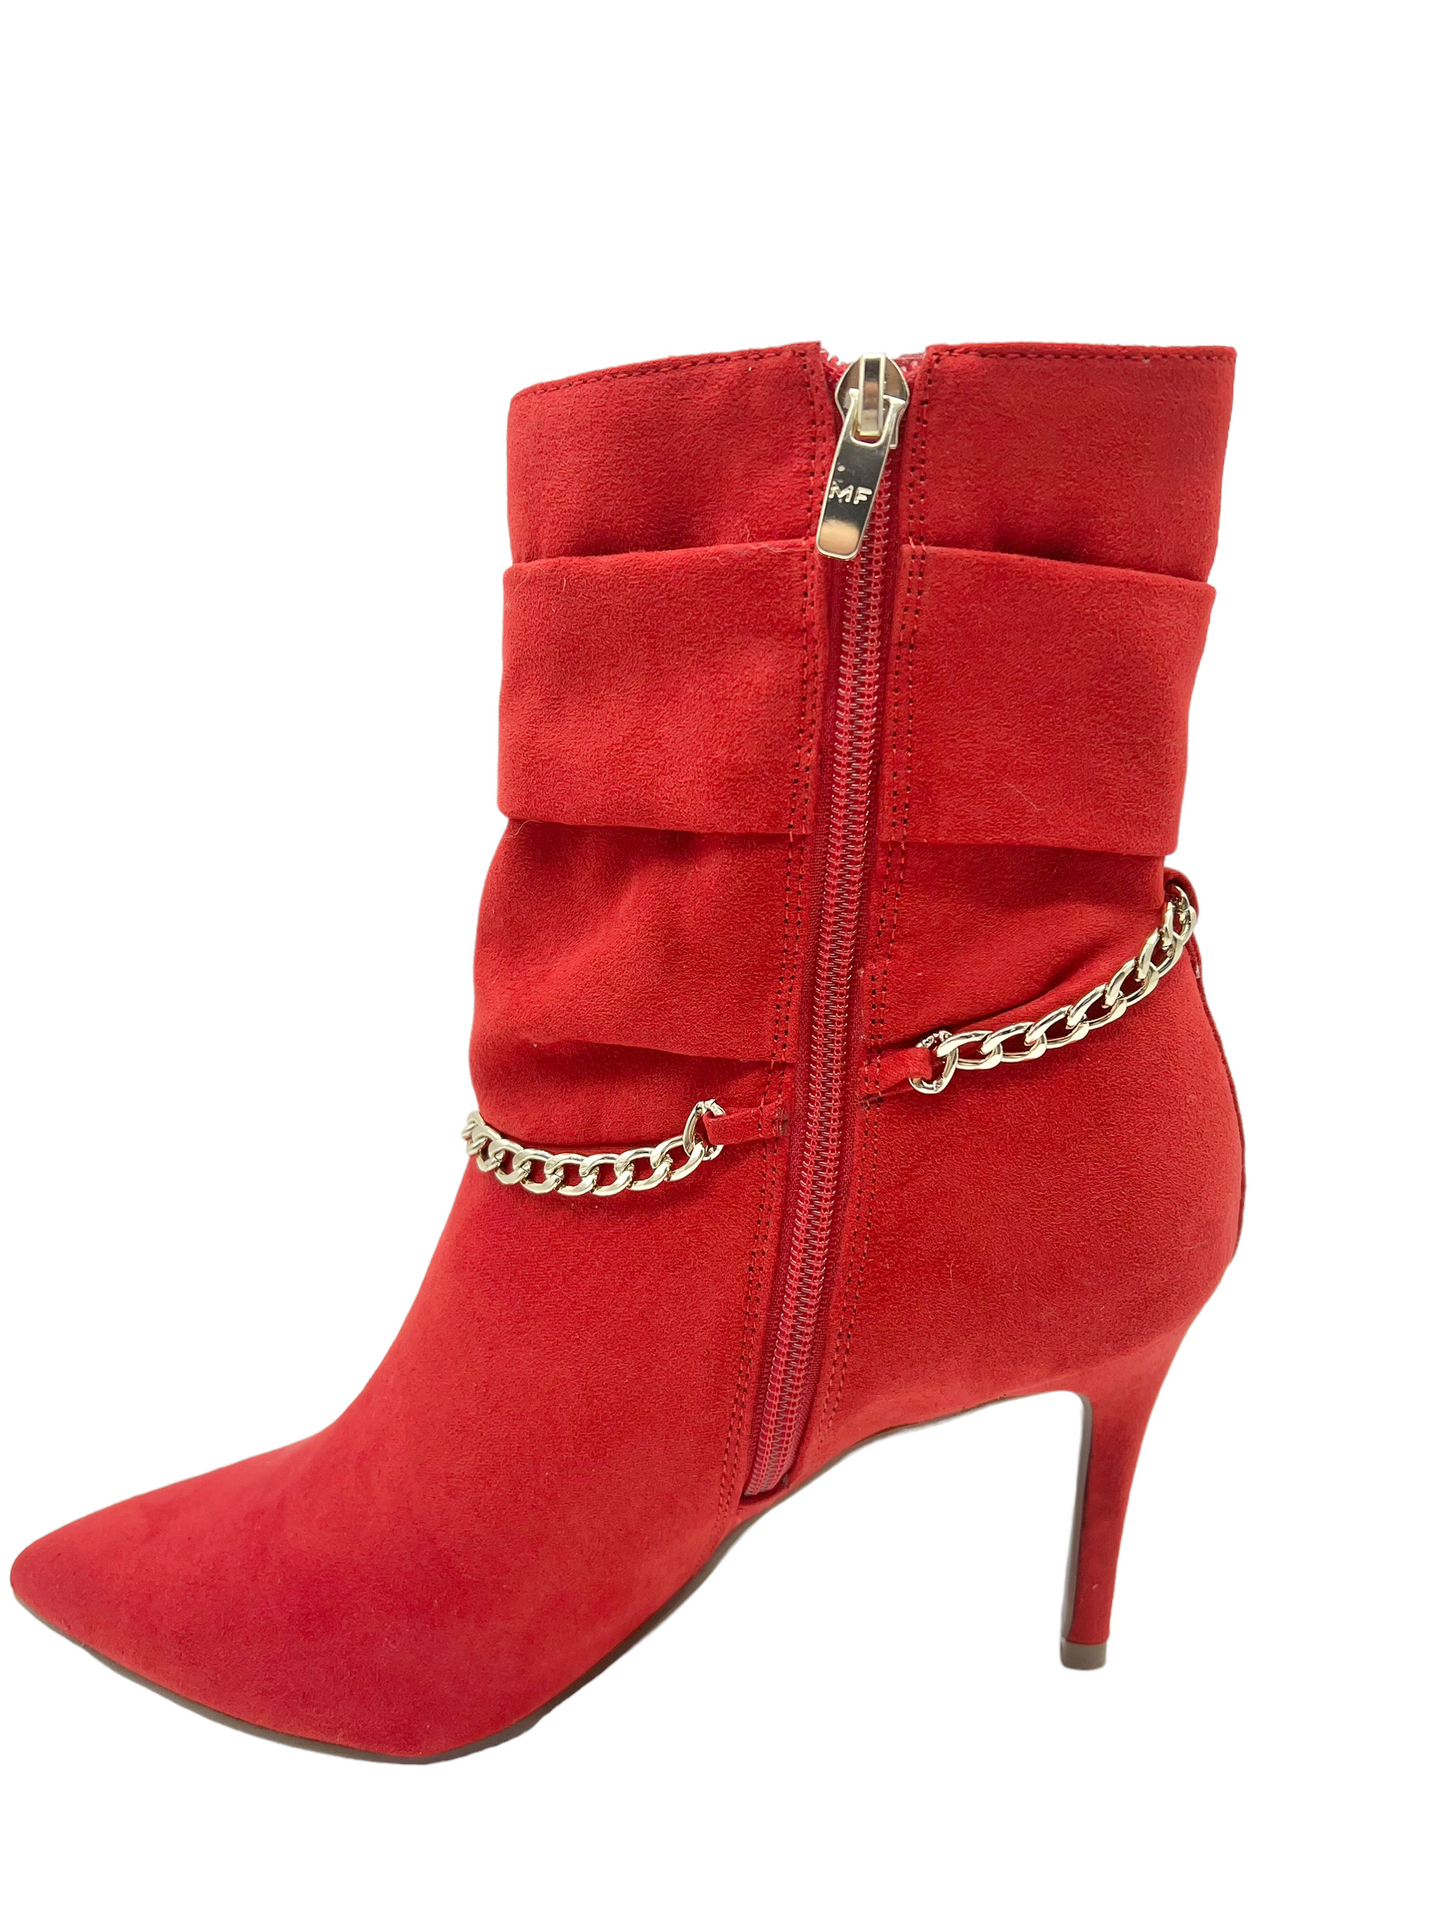 Marc Fisher Red Chain Size 8.5 Boots